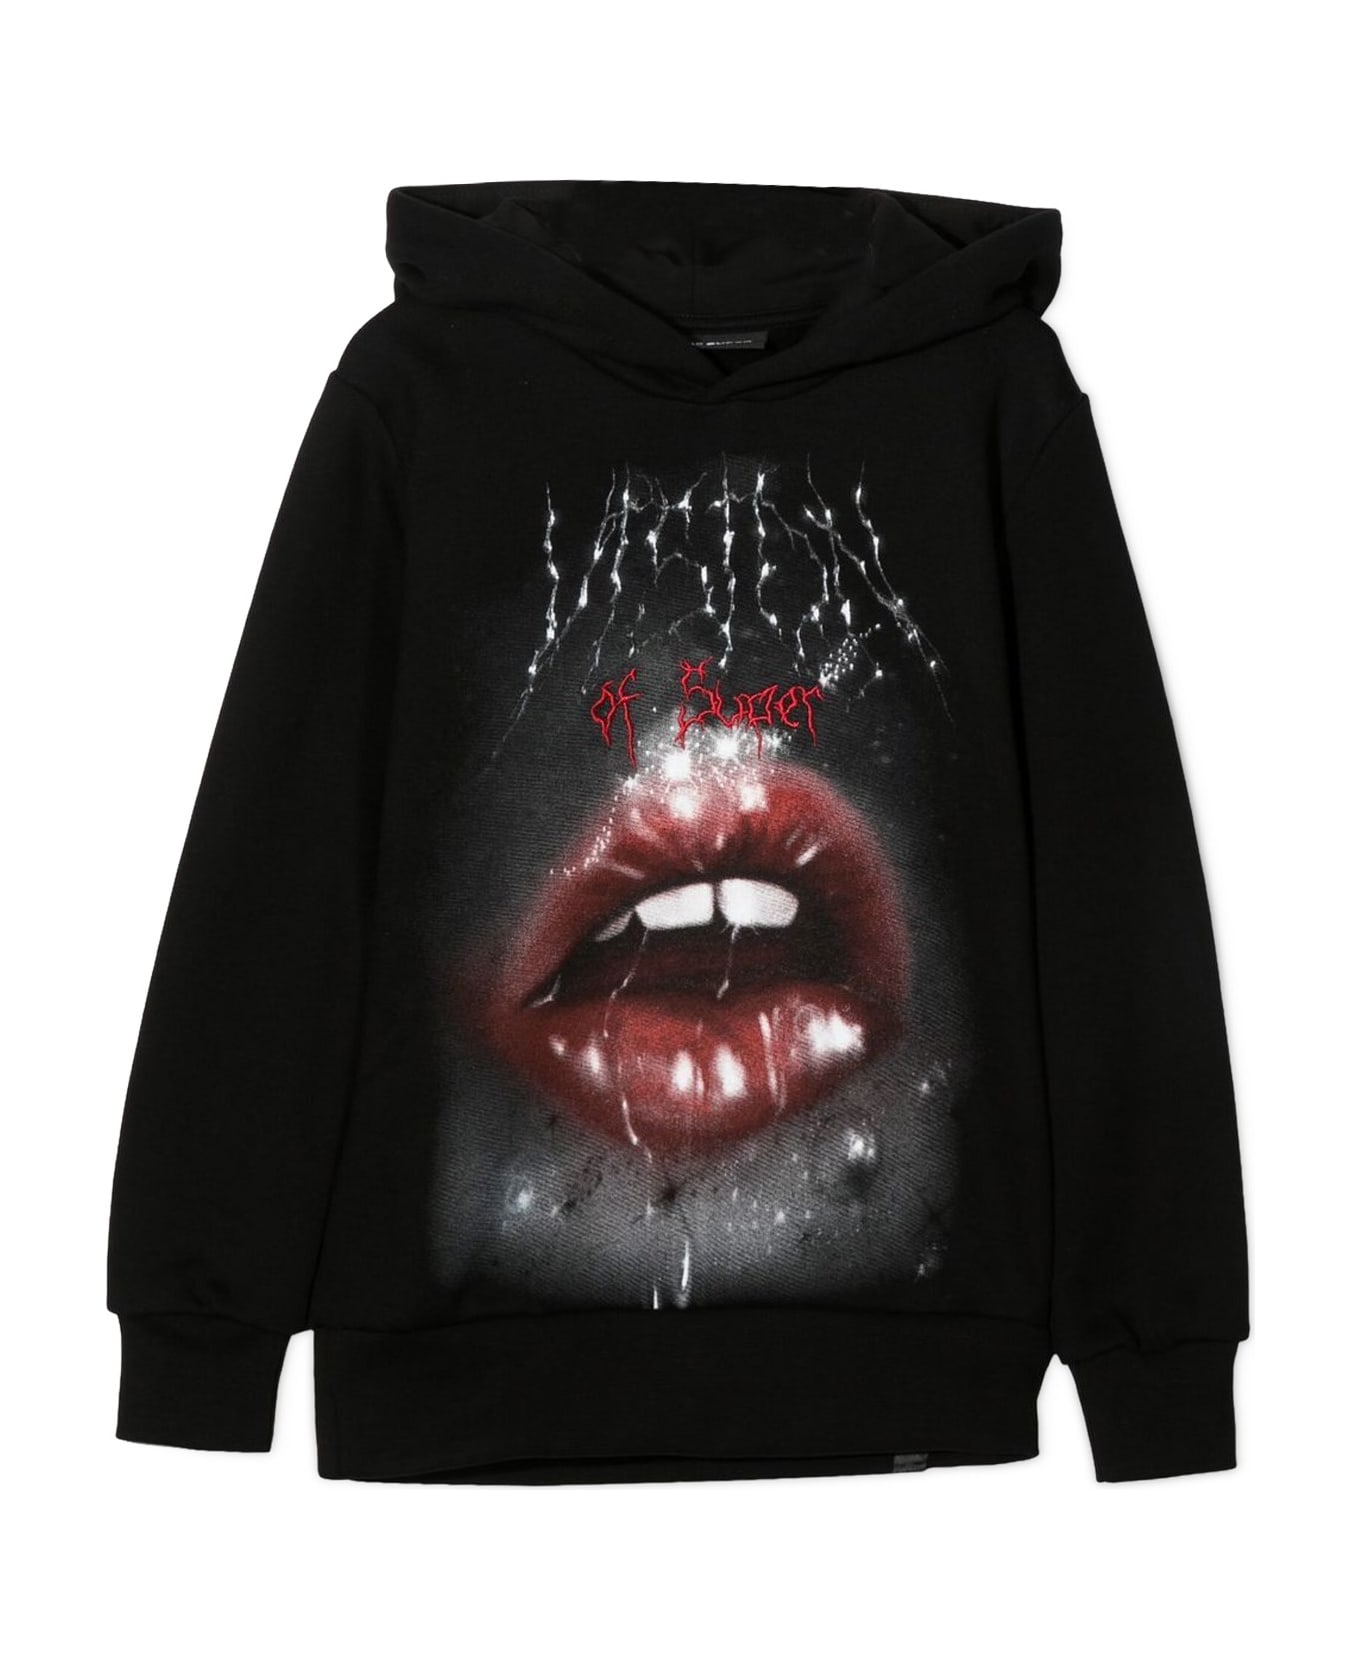 Vision of Super Hoodie Rock Mouth Print - NERO